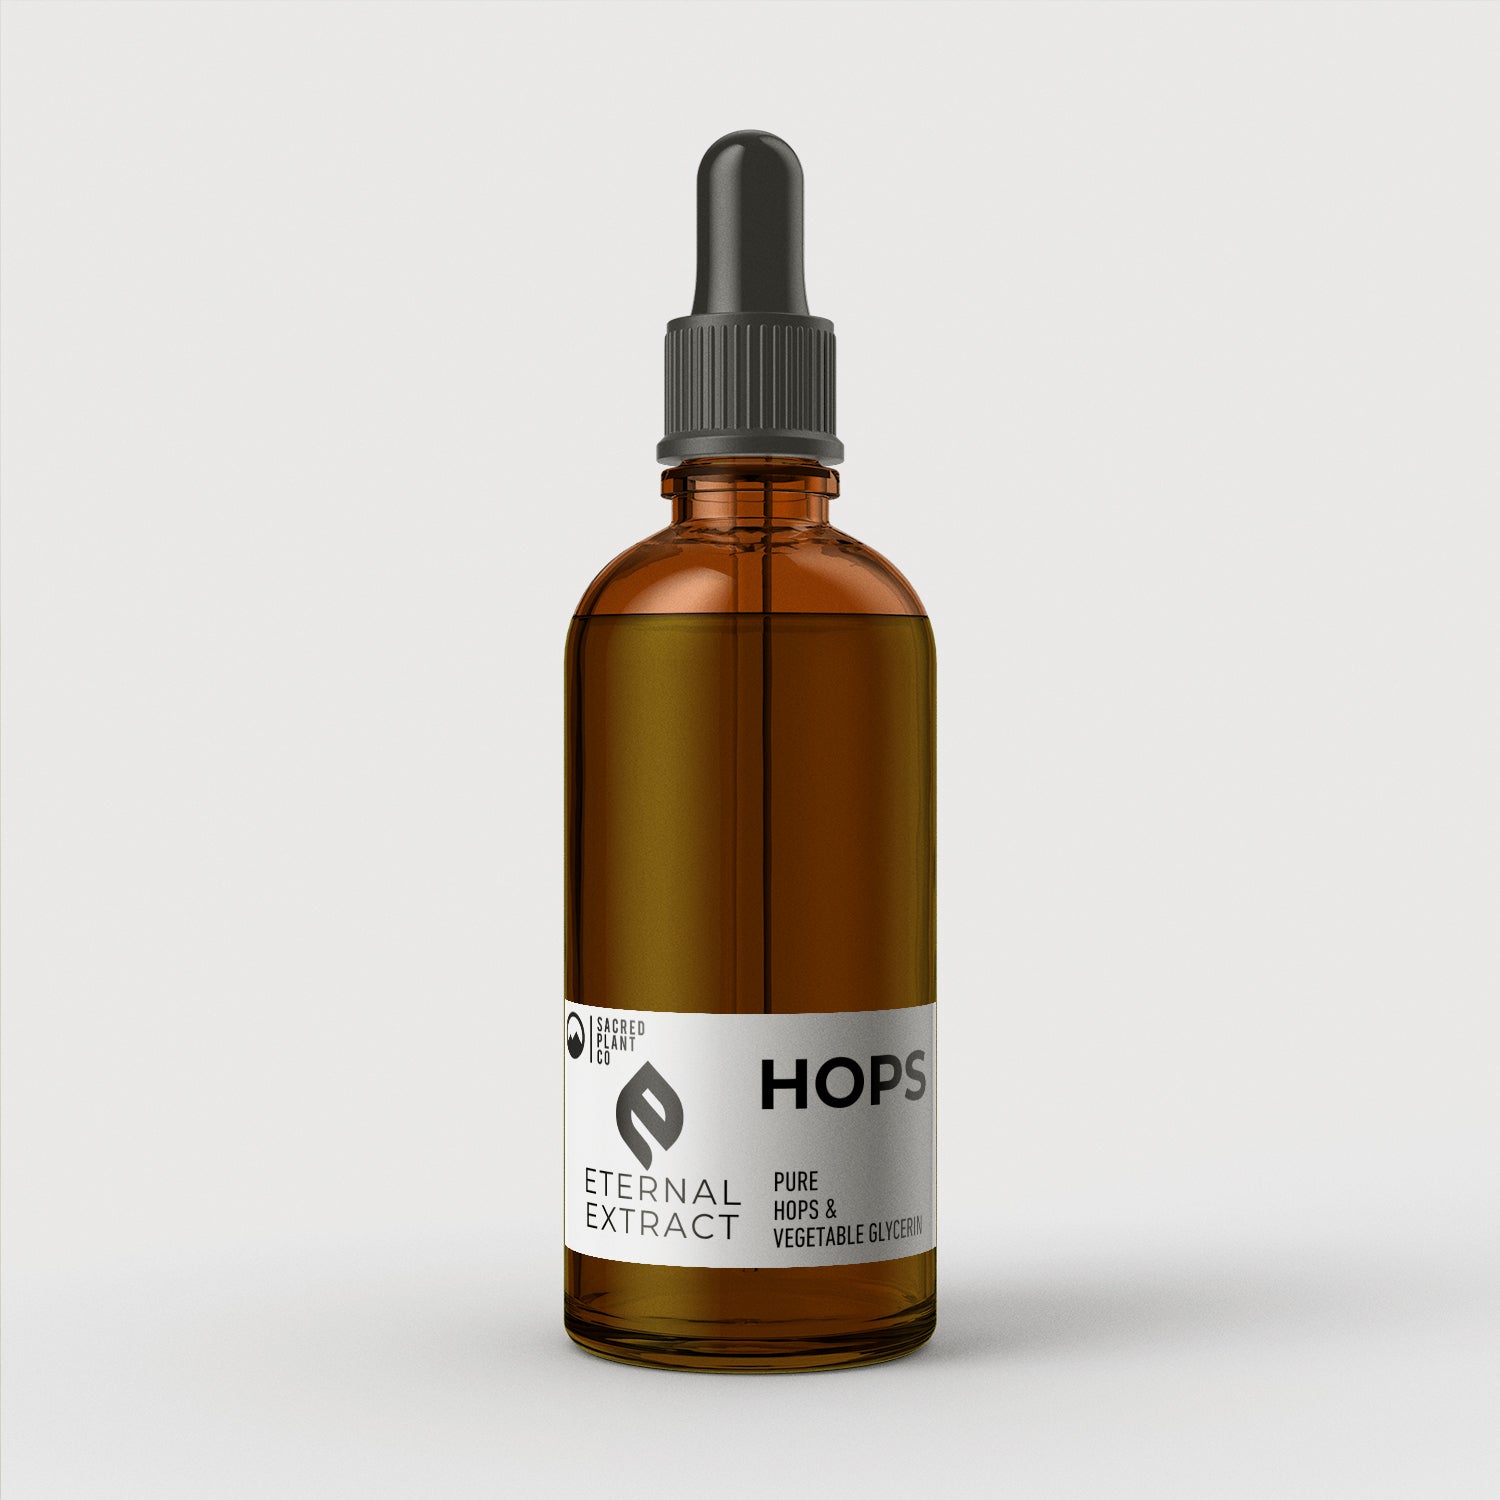 Eternal Extract Hops Tincture in a large amber bottle by Sacred Plant Co, showcasing pure hops and vegetable glycerin ingredients.